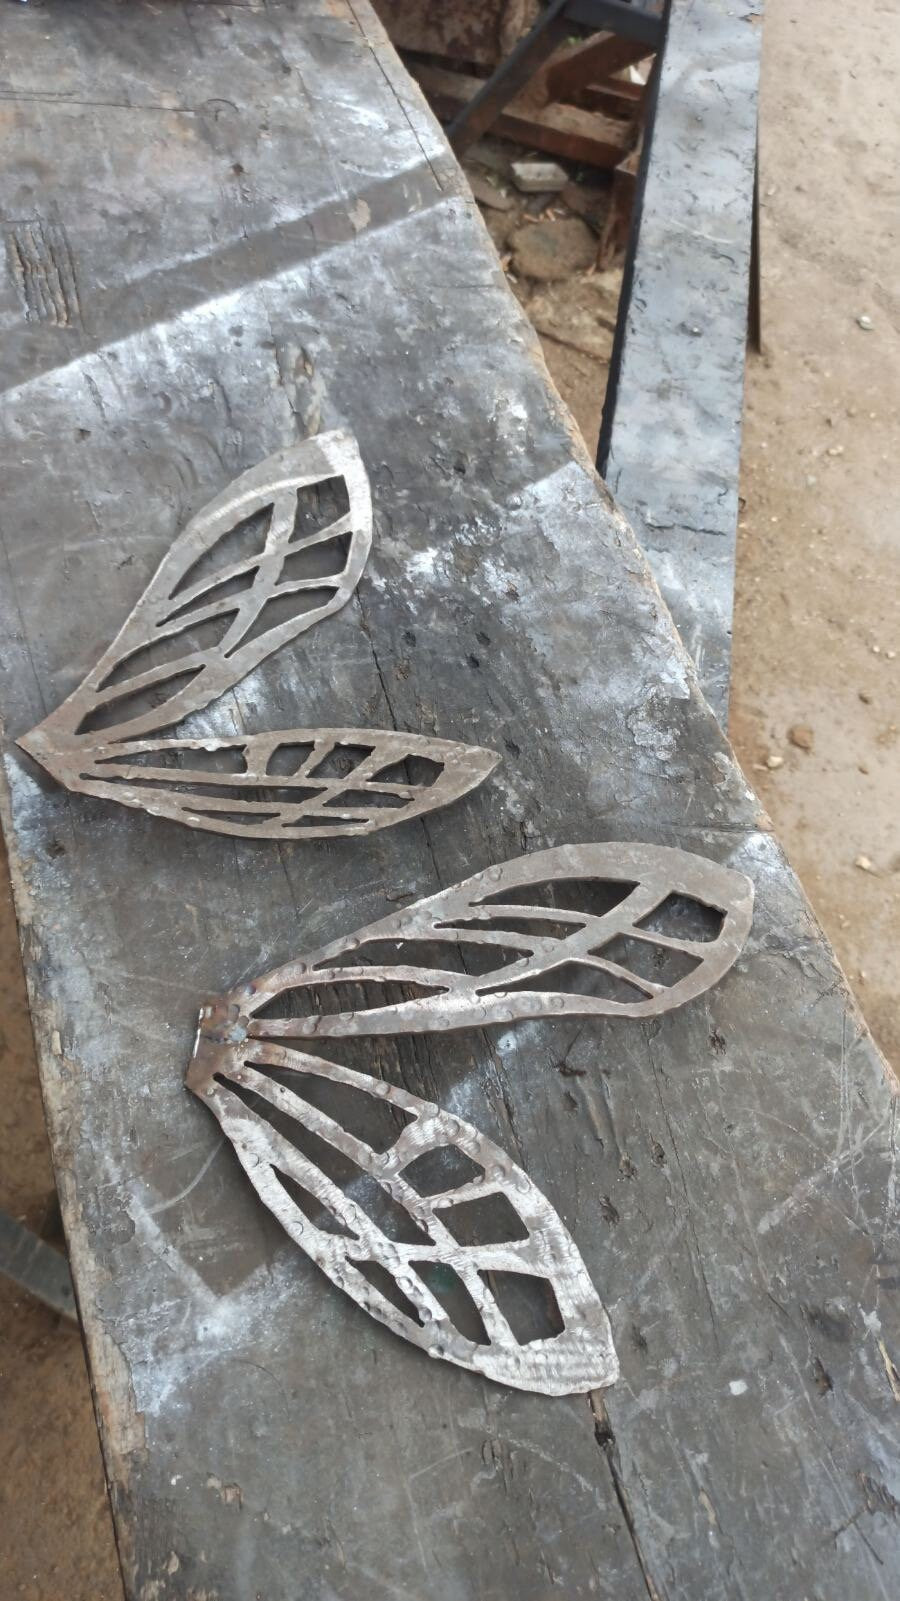 Dragonfly, iron gift, steel gift, steel anniversary, iron anniversary, insect, garden, yard, fence, mother, grandma, oma, mailbox, Christmas